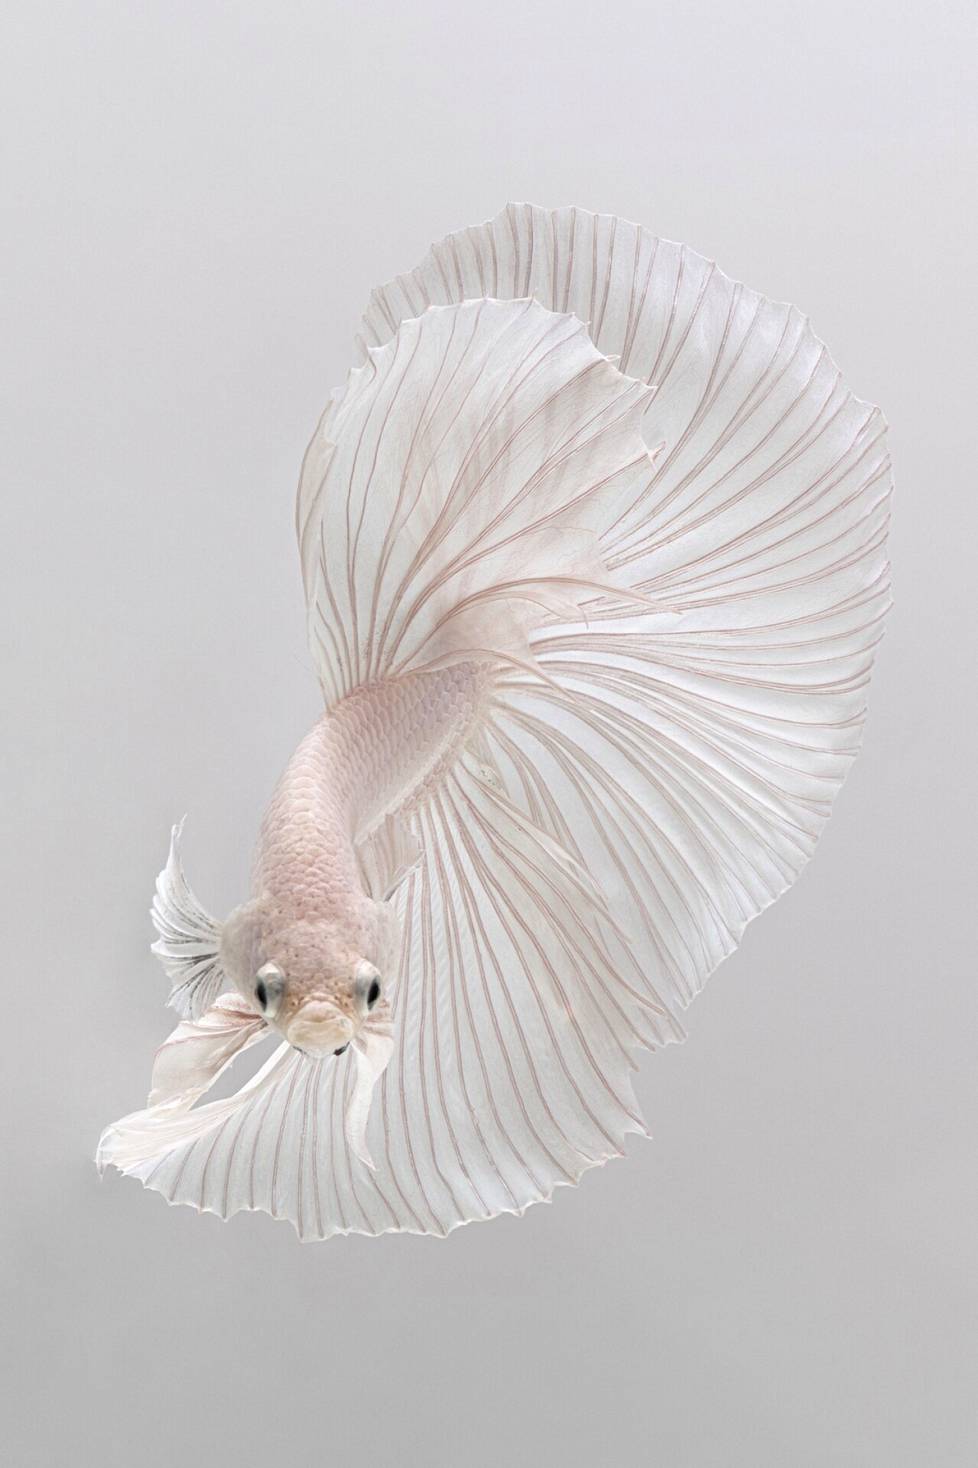 Bangkok-based Visarute Angkatavanich has become known for his photographs of fish. 